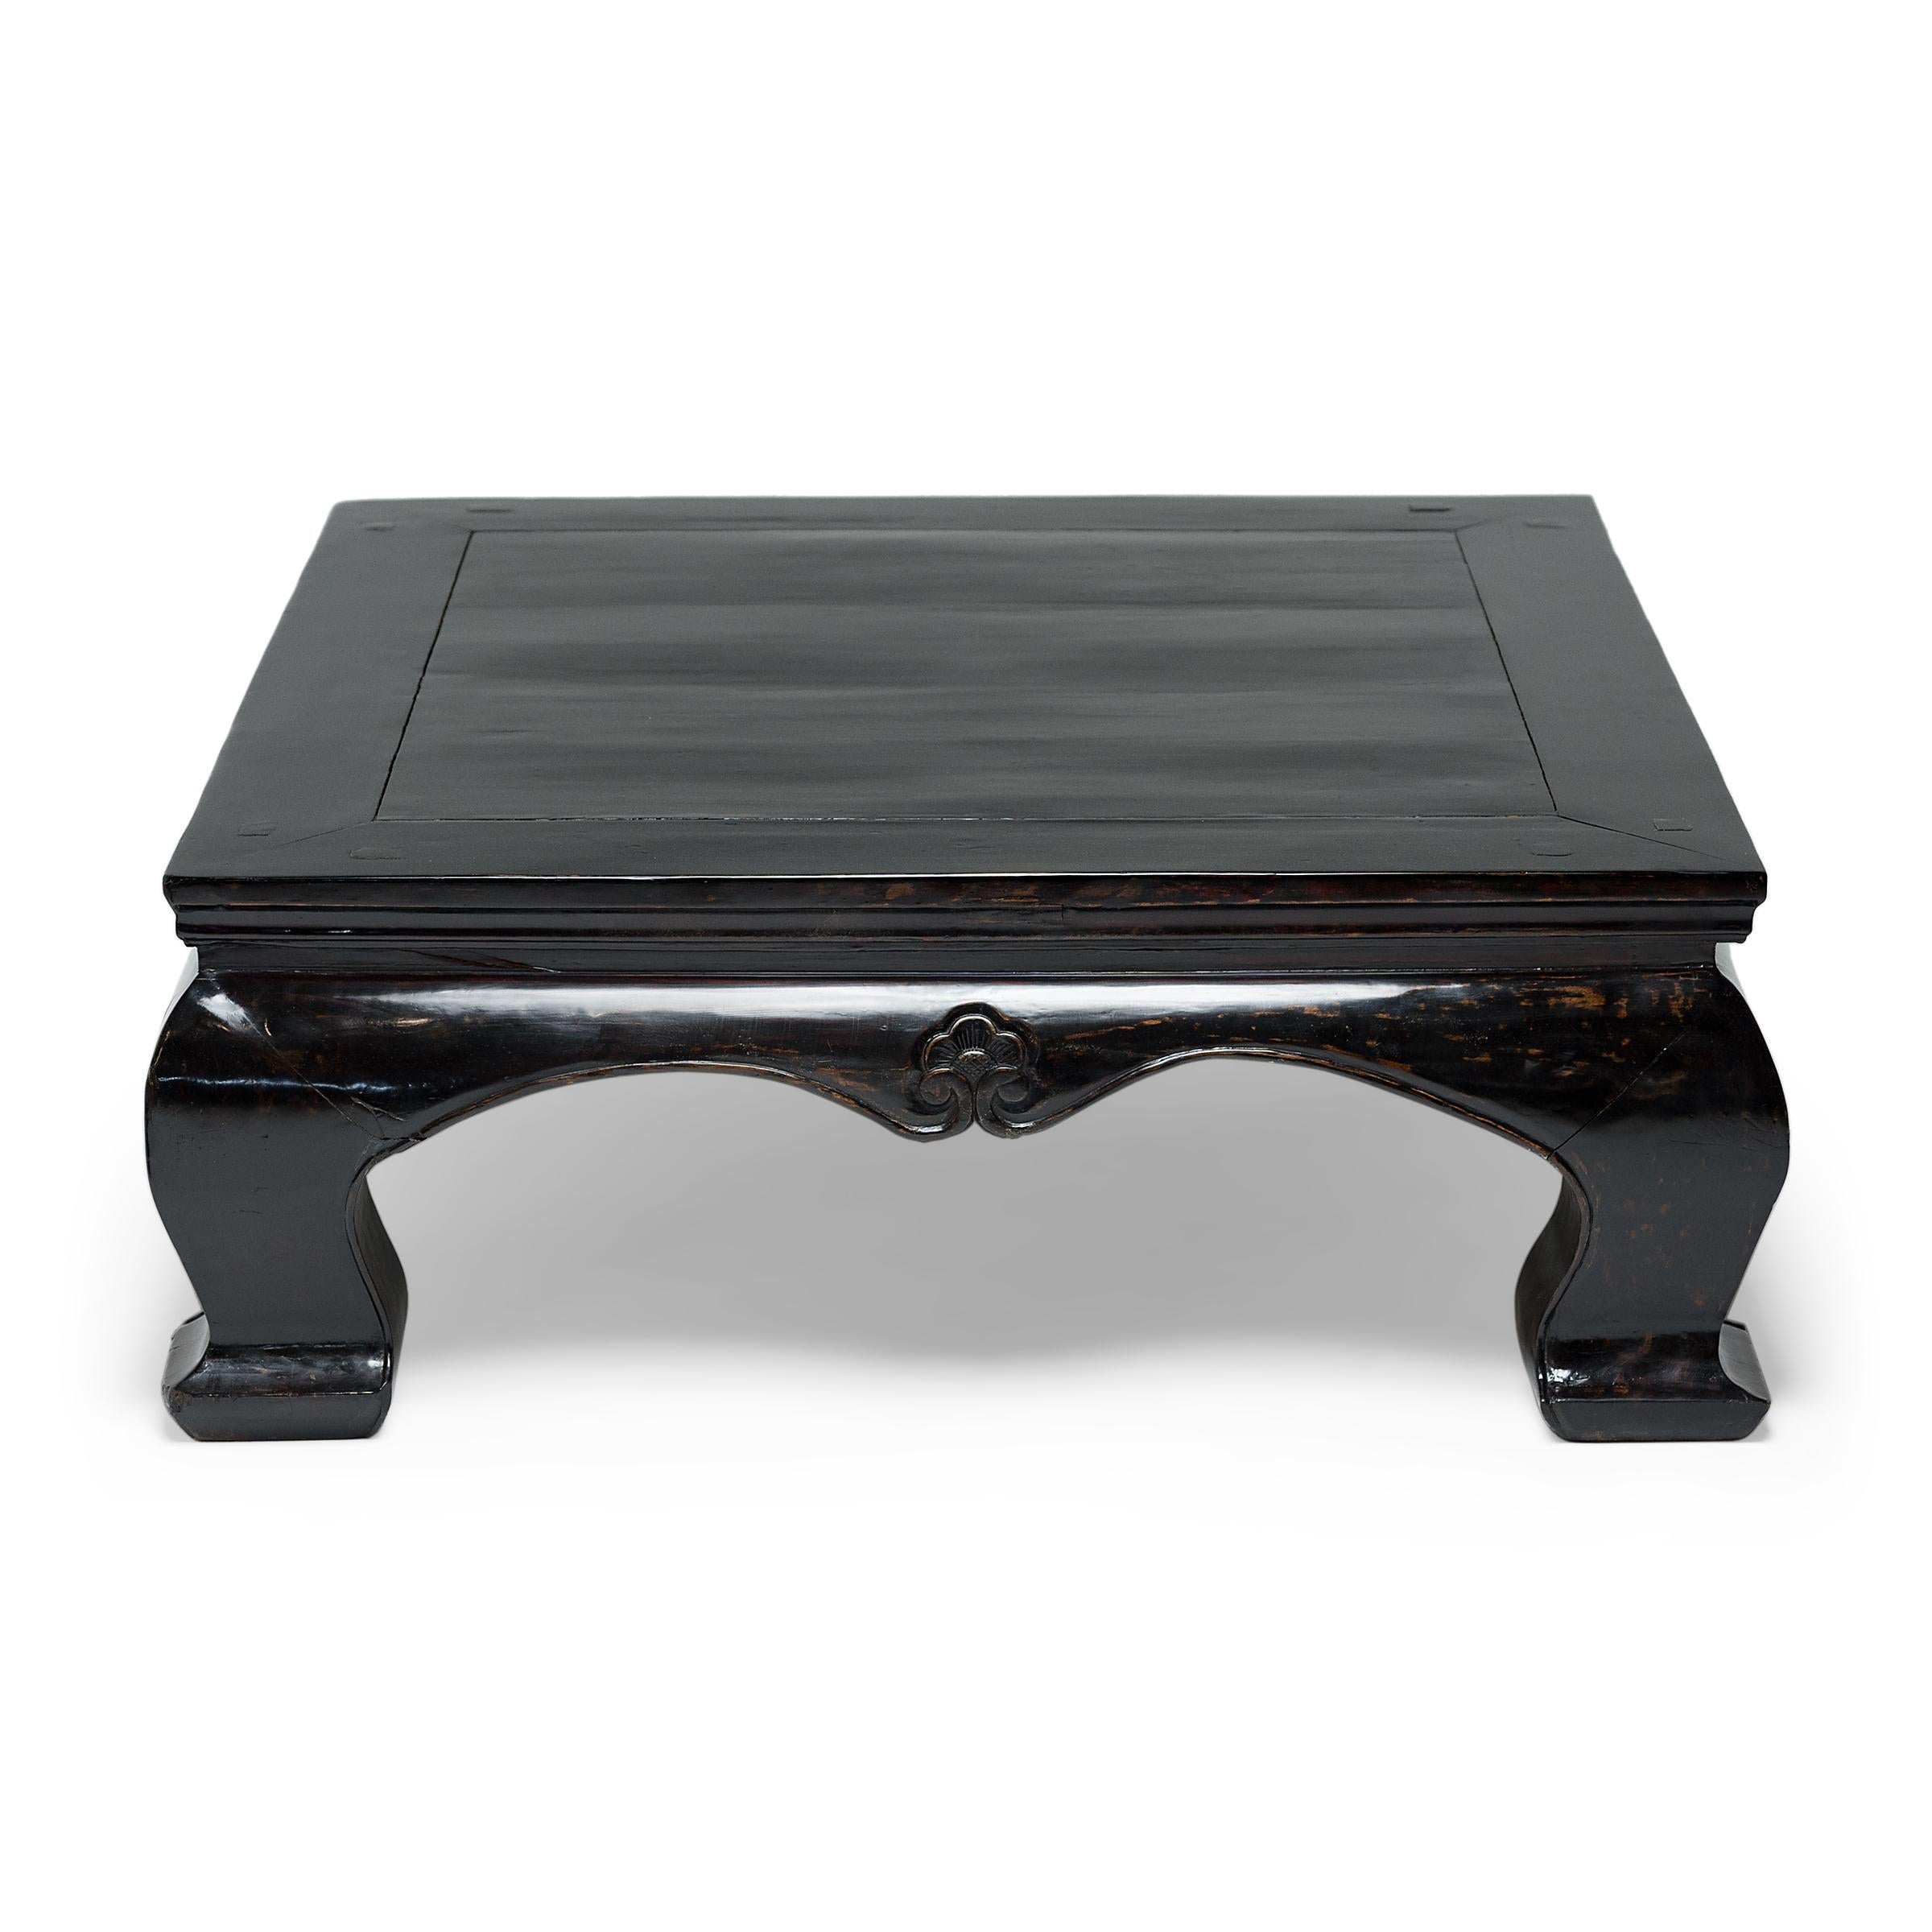 Qing Chinese Black Lacquer Square Kang Table, c. 1850